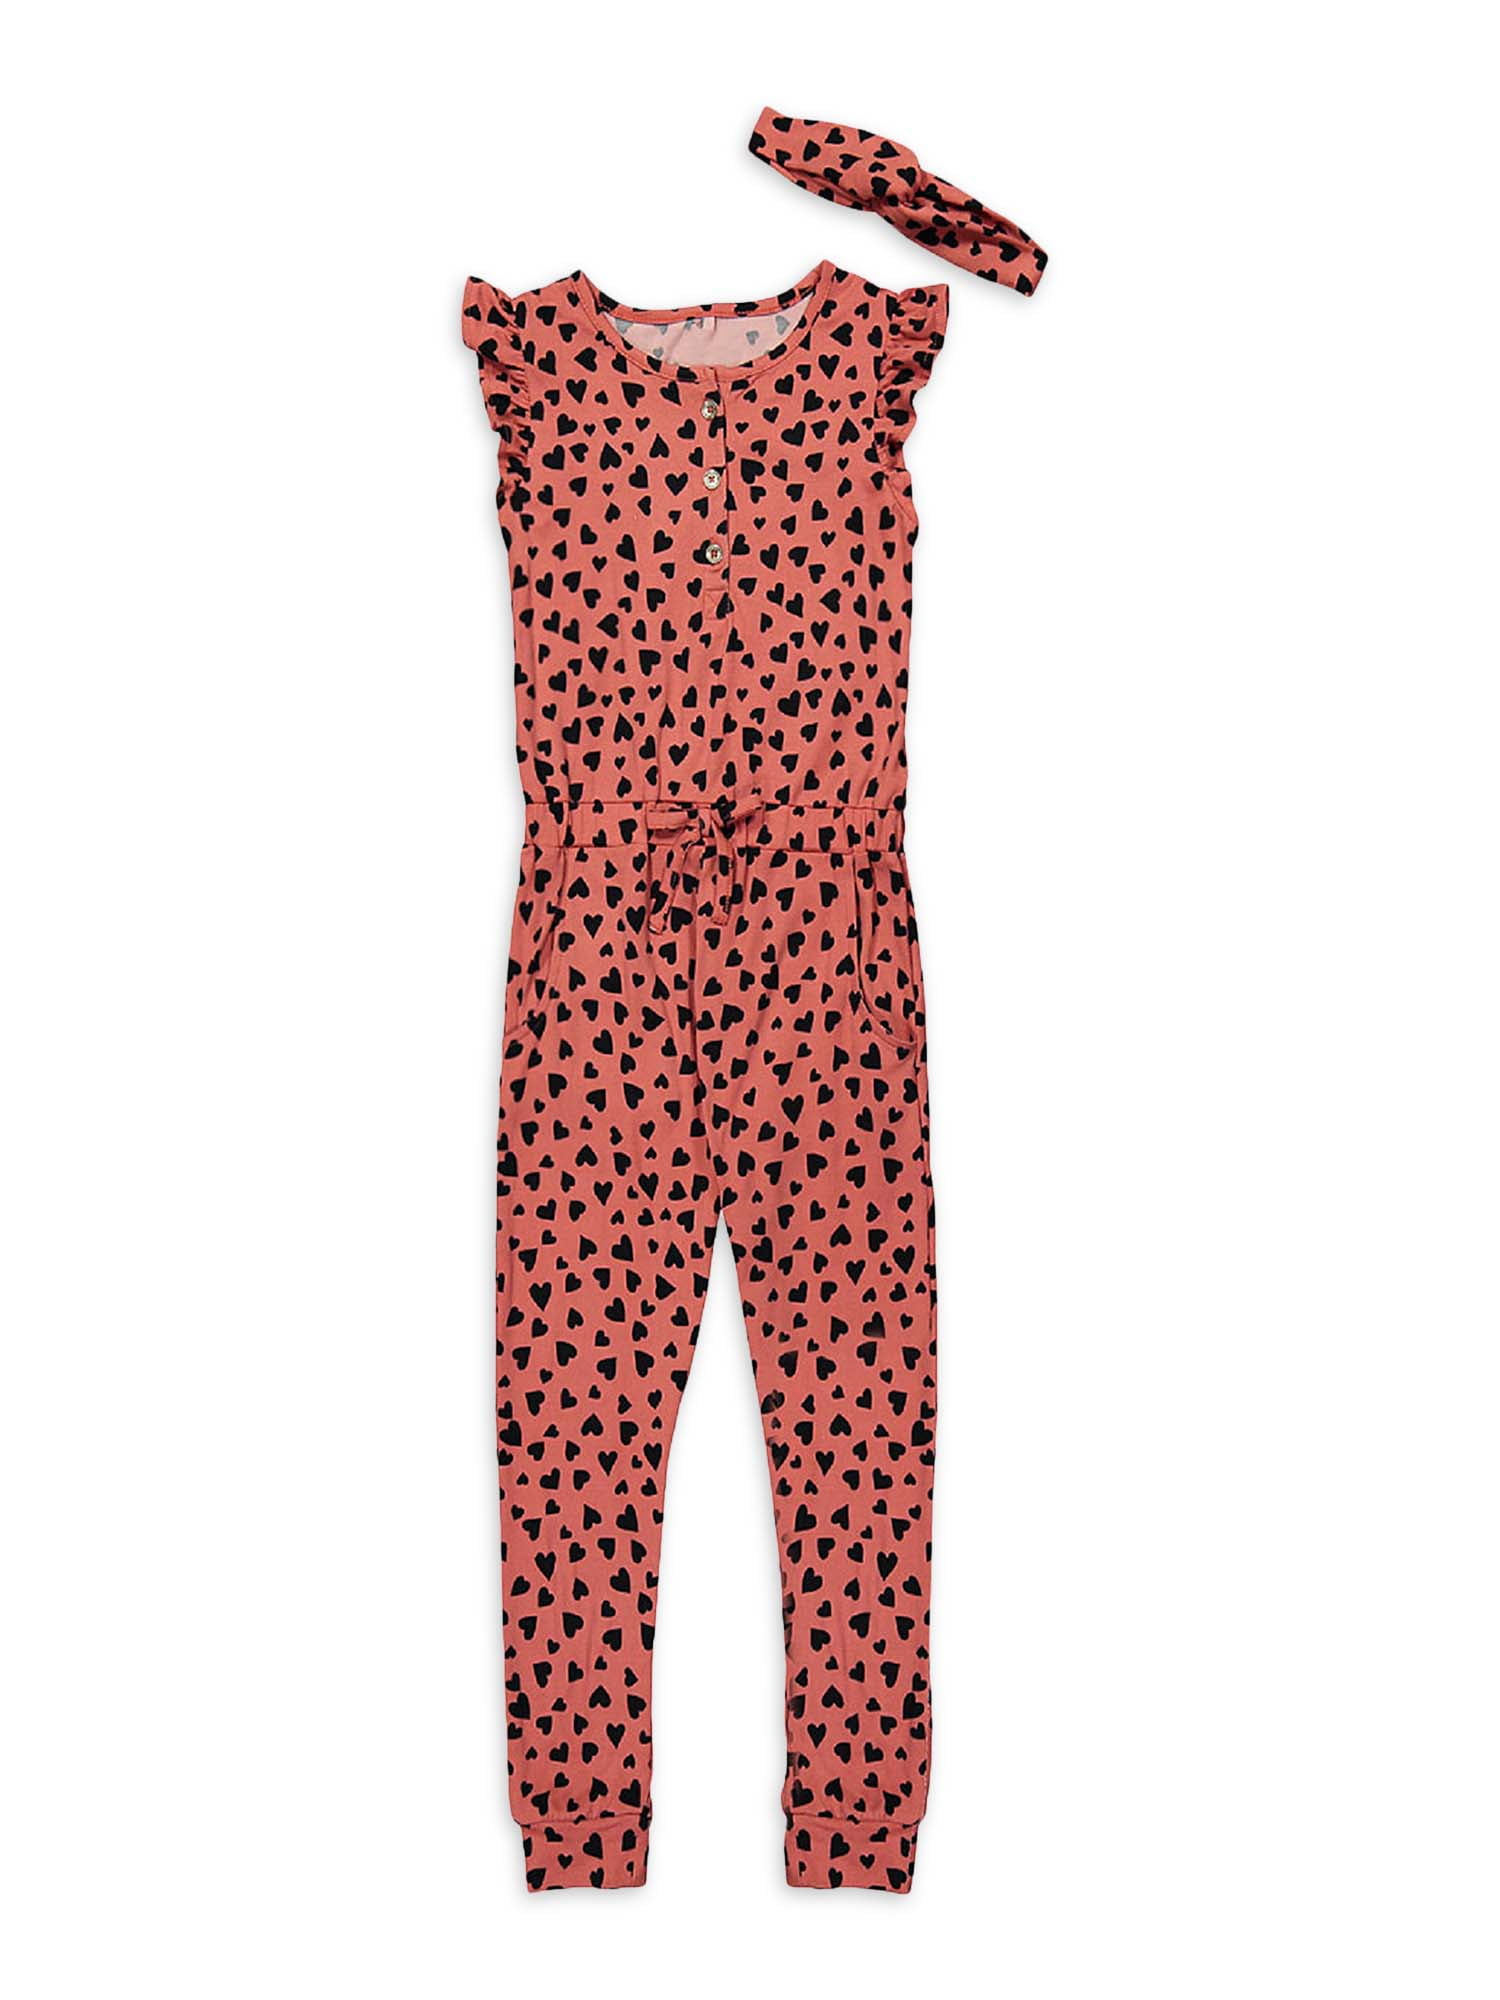 Freestyle Revolution Toddler Girl Yummy Jumpsuit, Size 2T-4T - Walmart.com